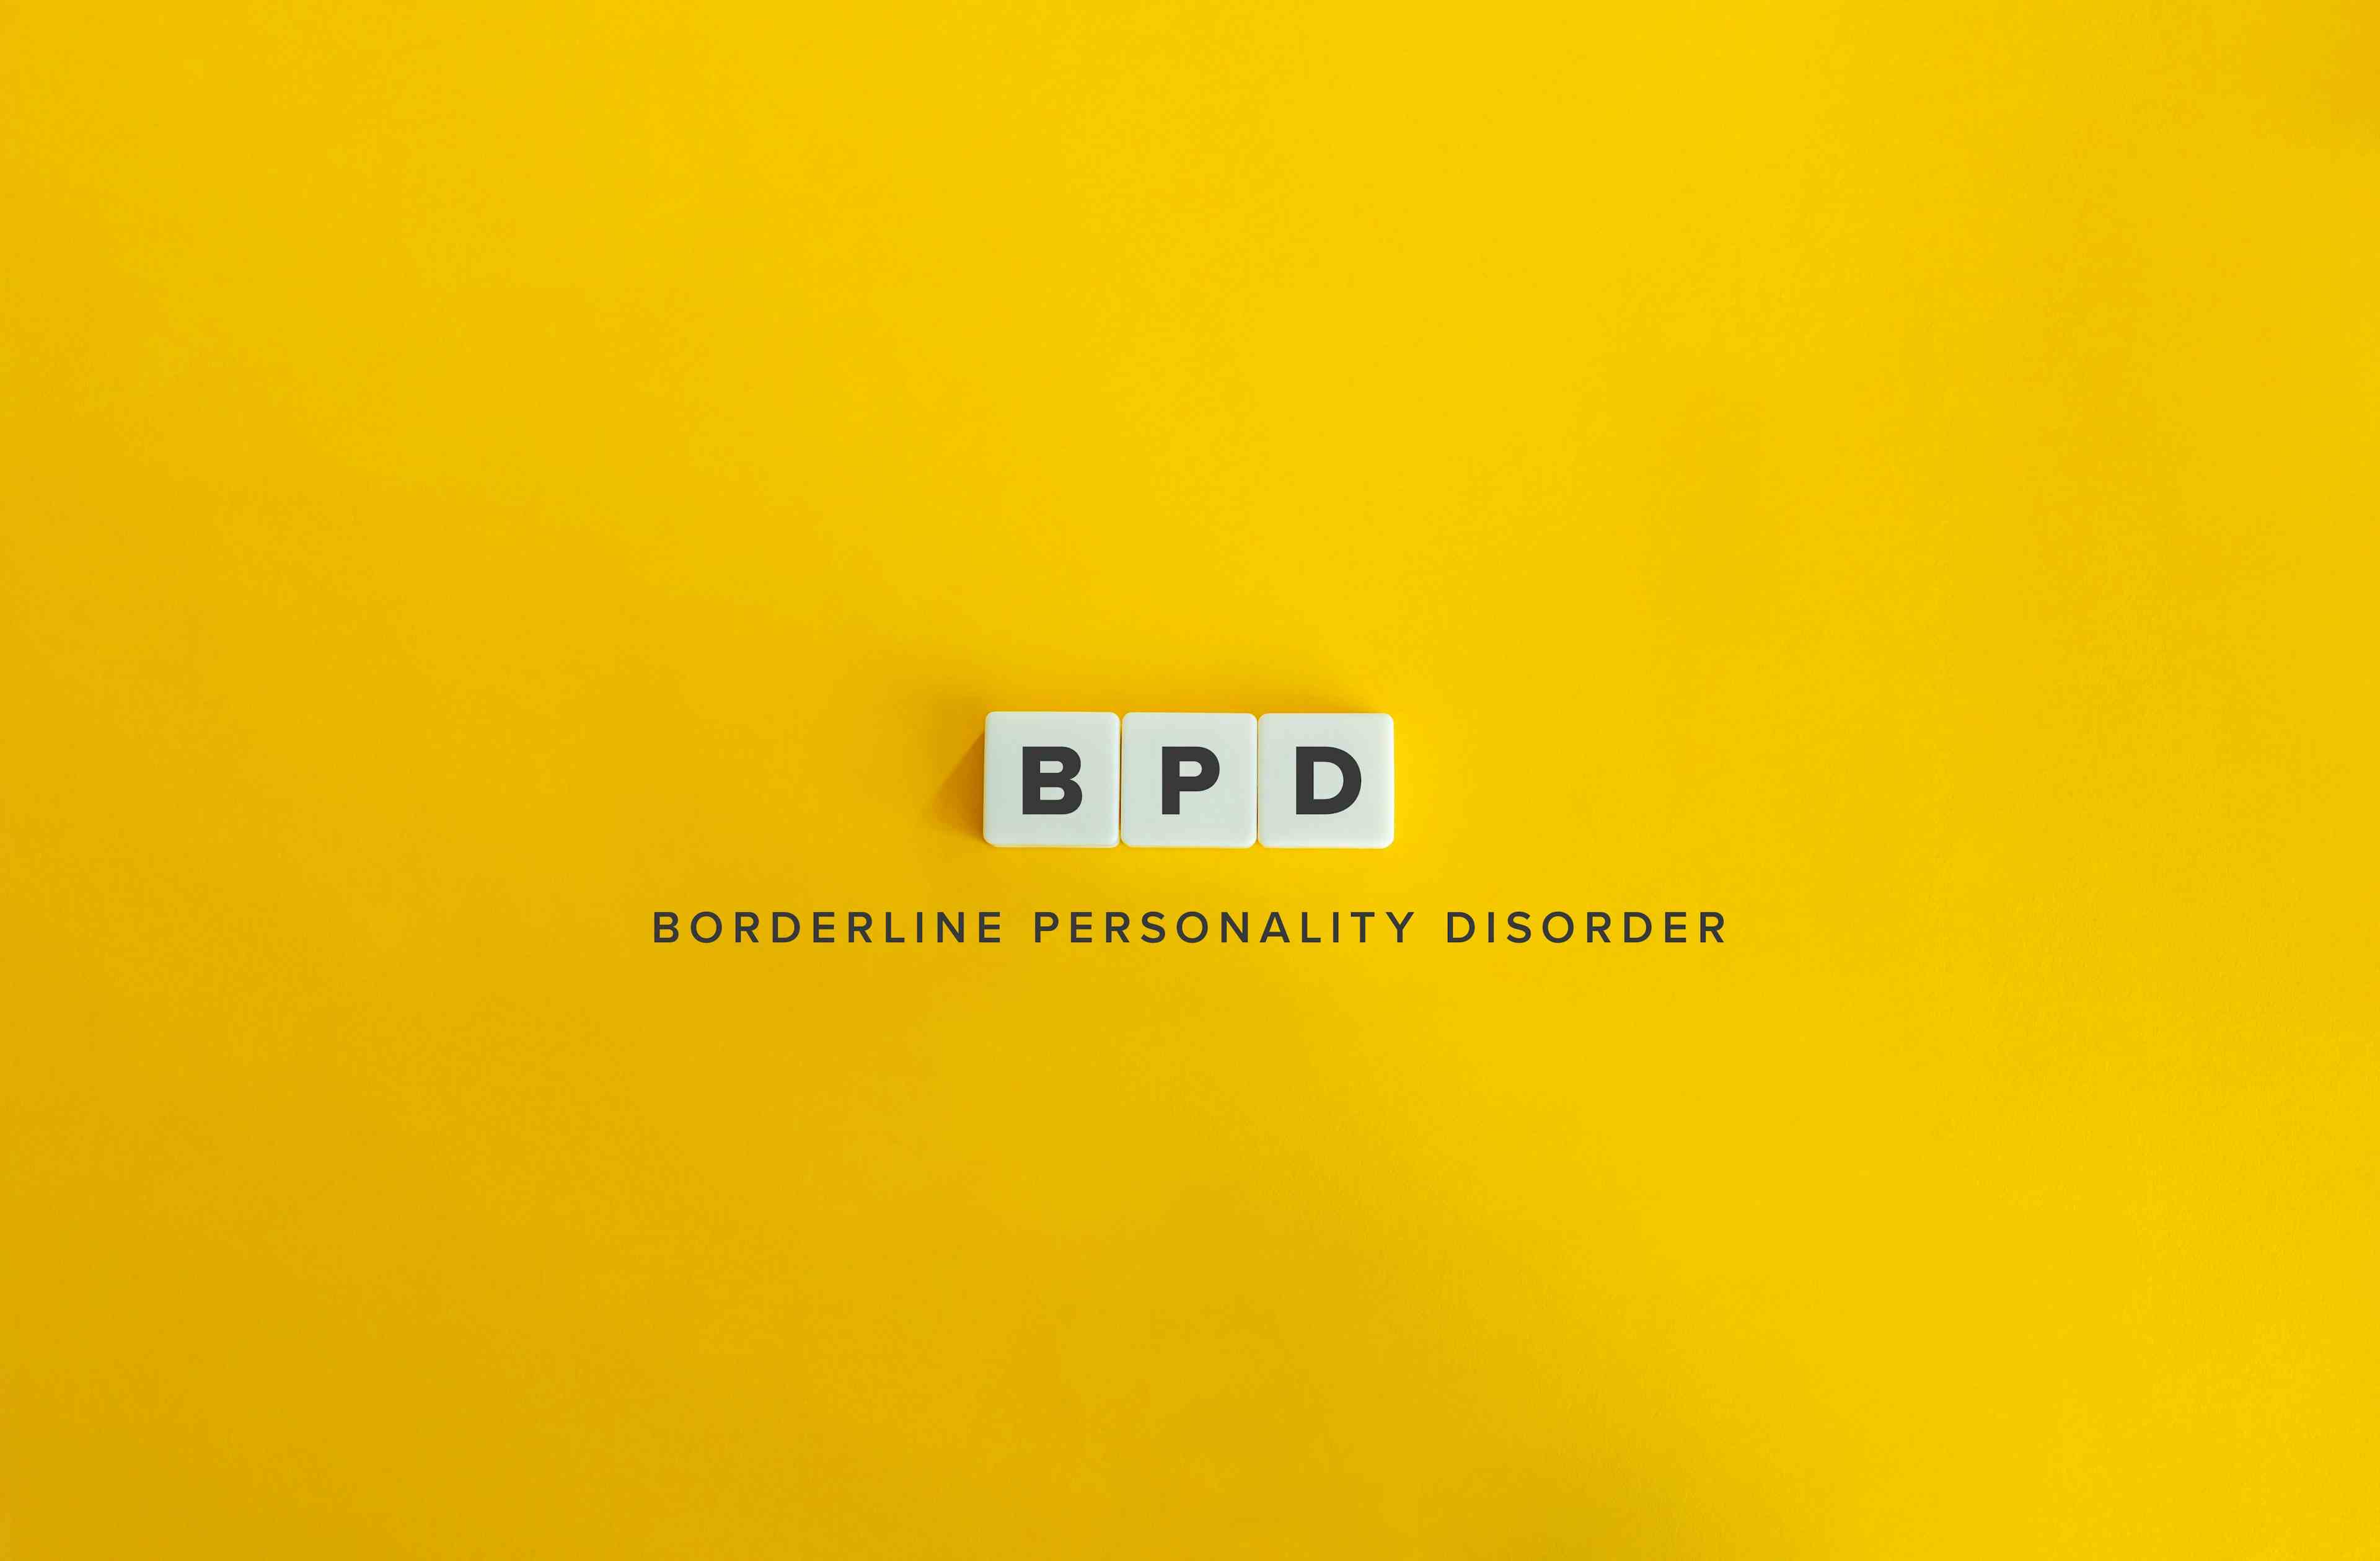 Image credit: photoopus | stock.adobe.com Borderline personality disorder (BPD) Mental Illness. Banner and Concept Image.